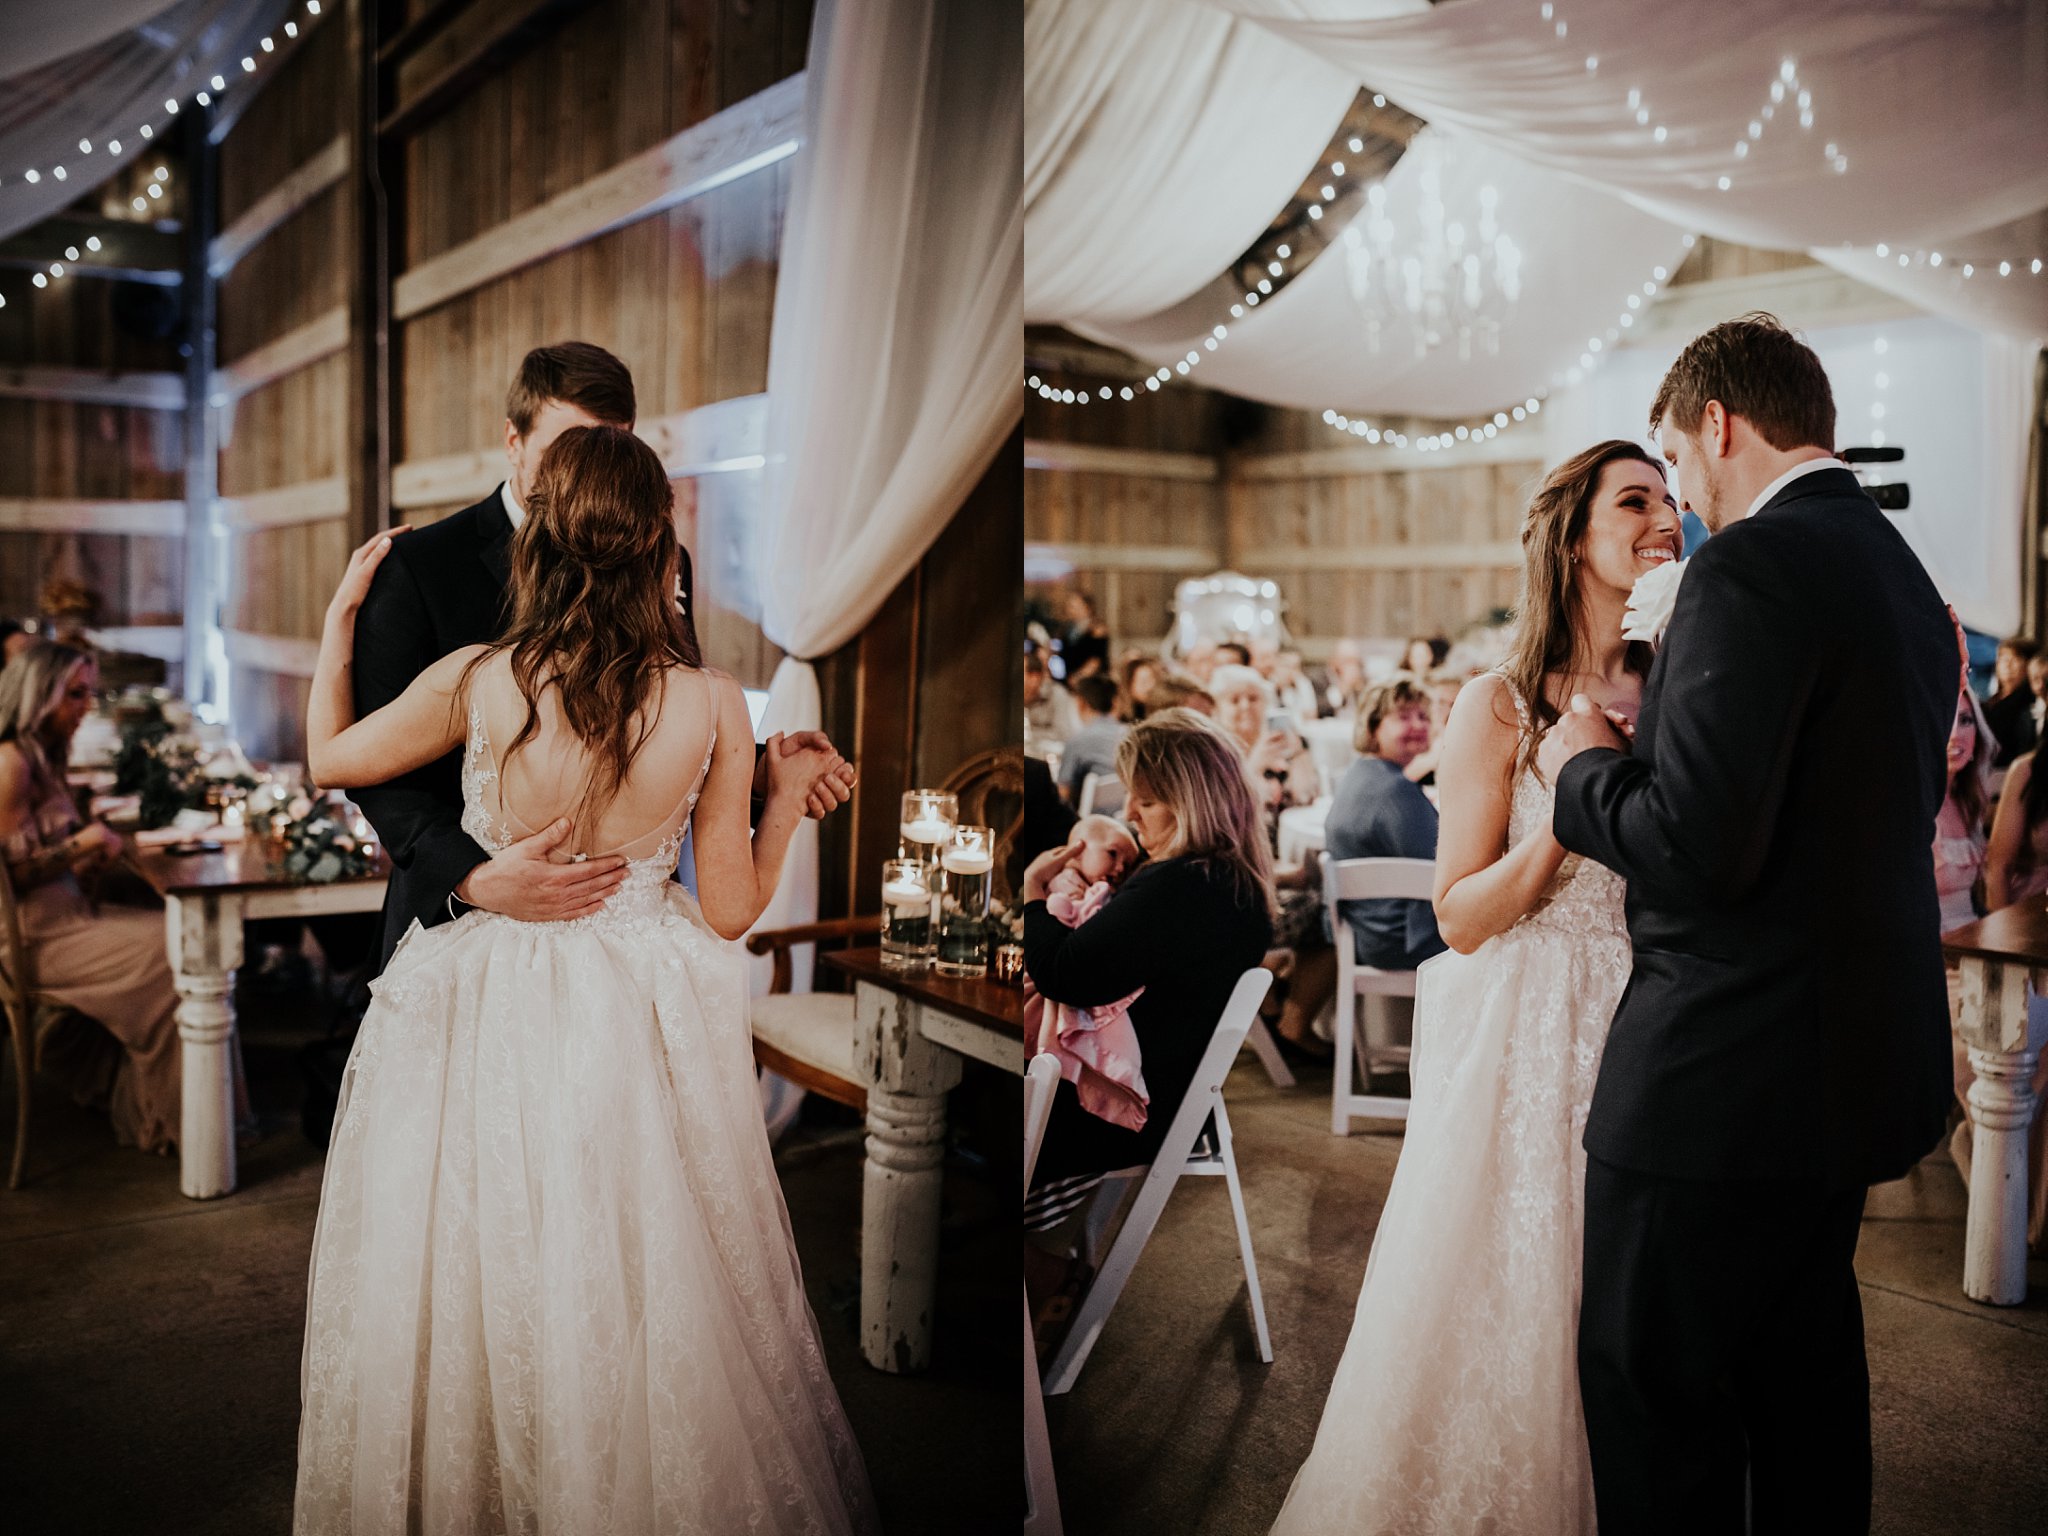 Bride and groom have their first dance in front of friends and family in a rustic barn